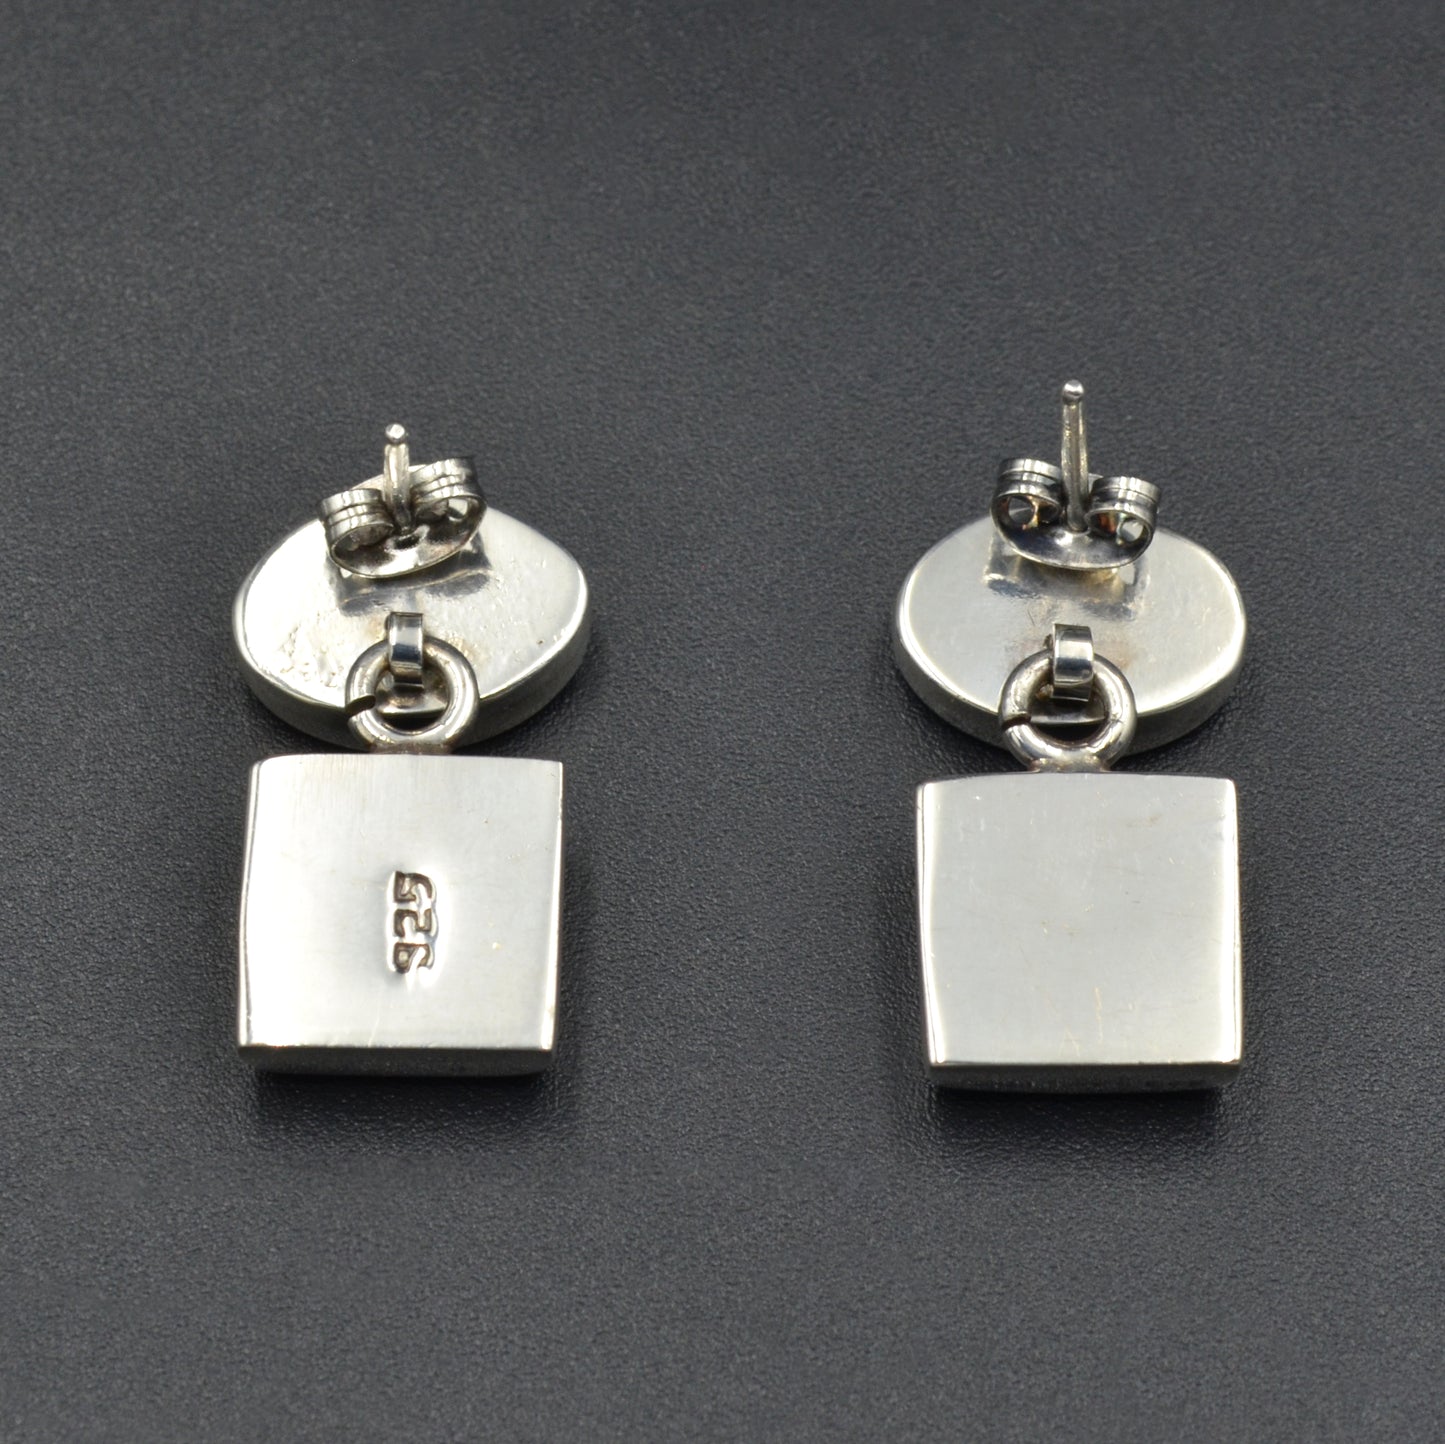 Oval and Square Silver Post Earrings